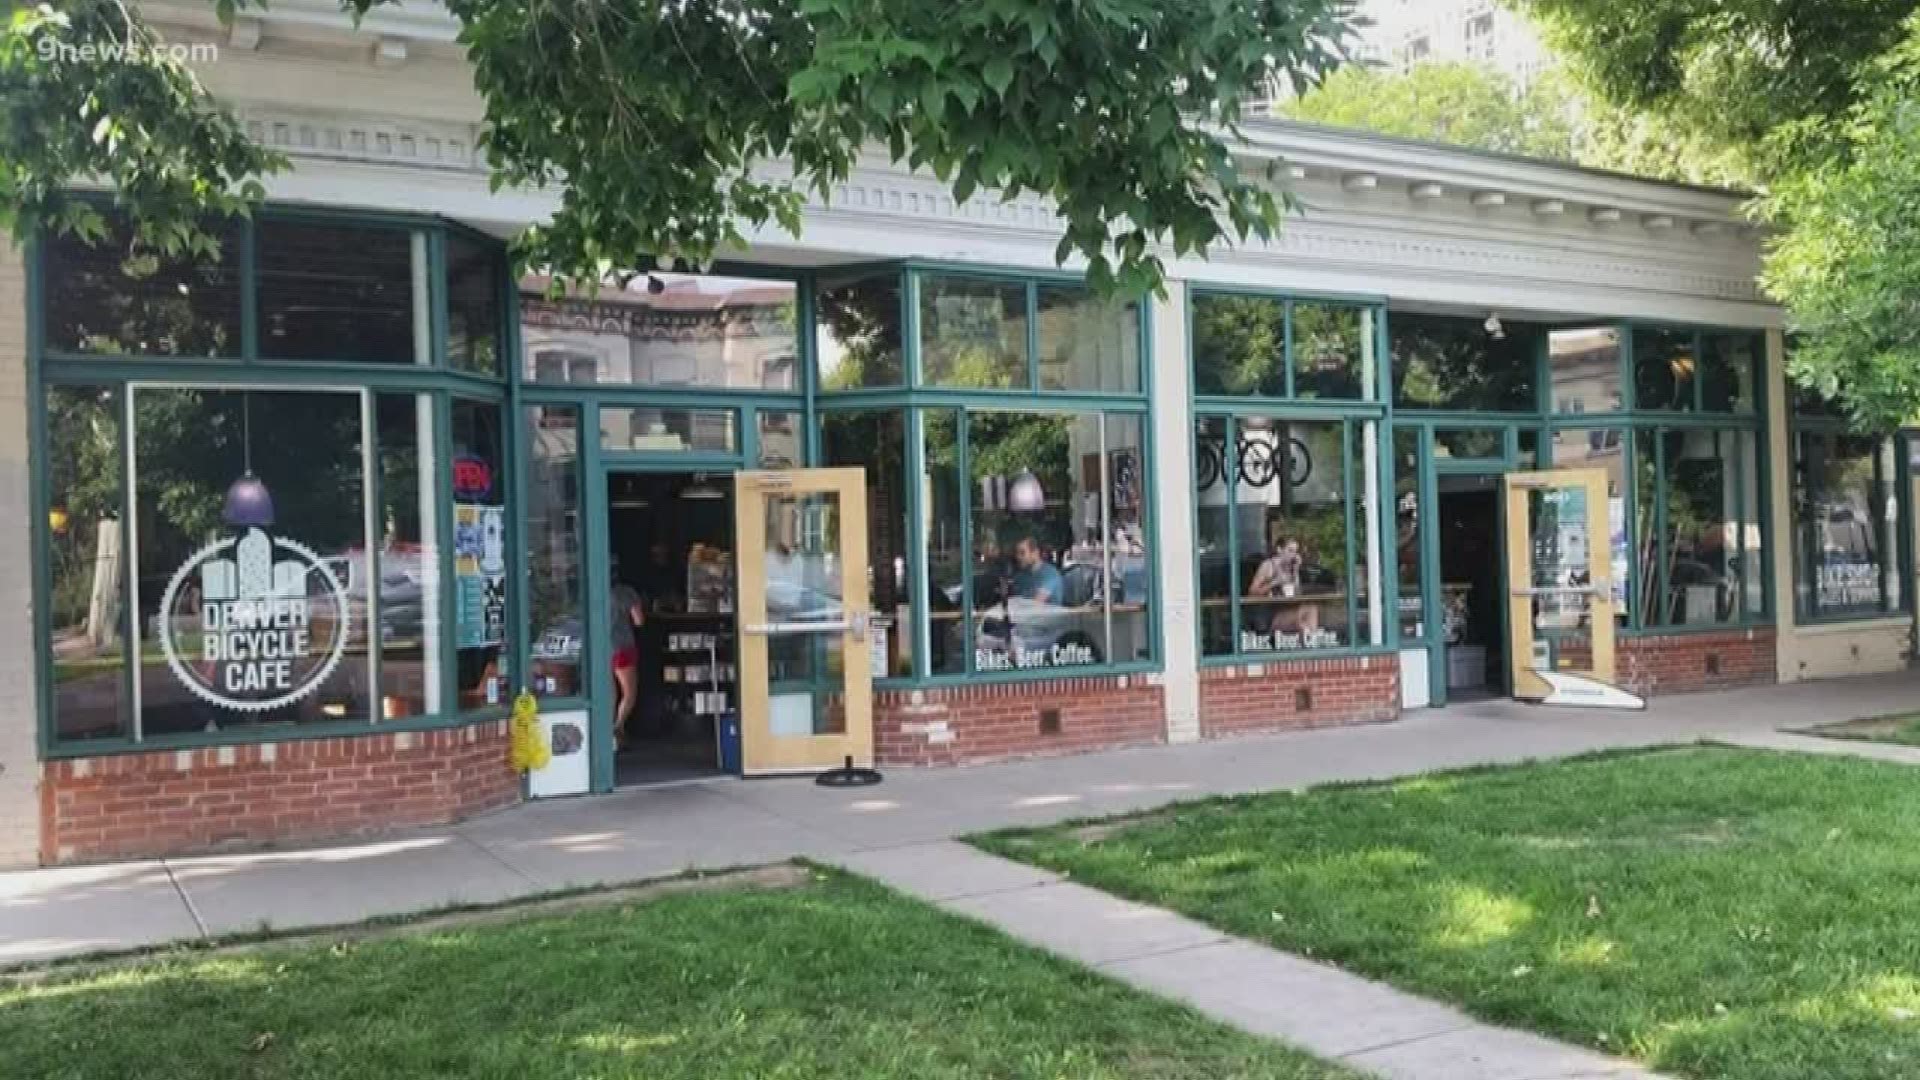 Denver Bicycle Cafe will soon close its doors 9news